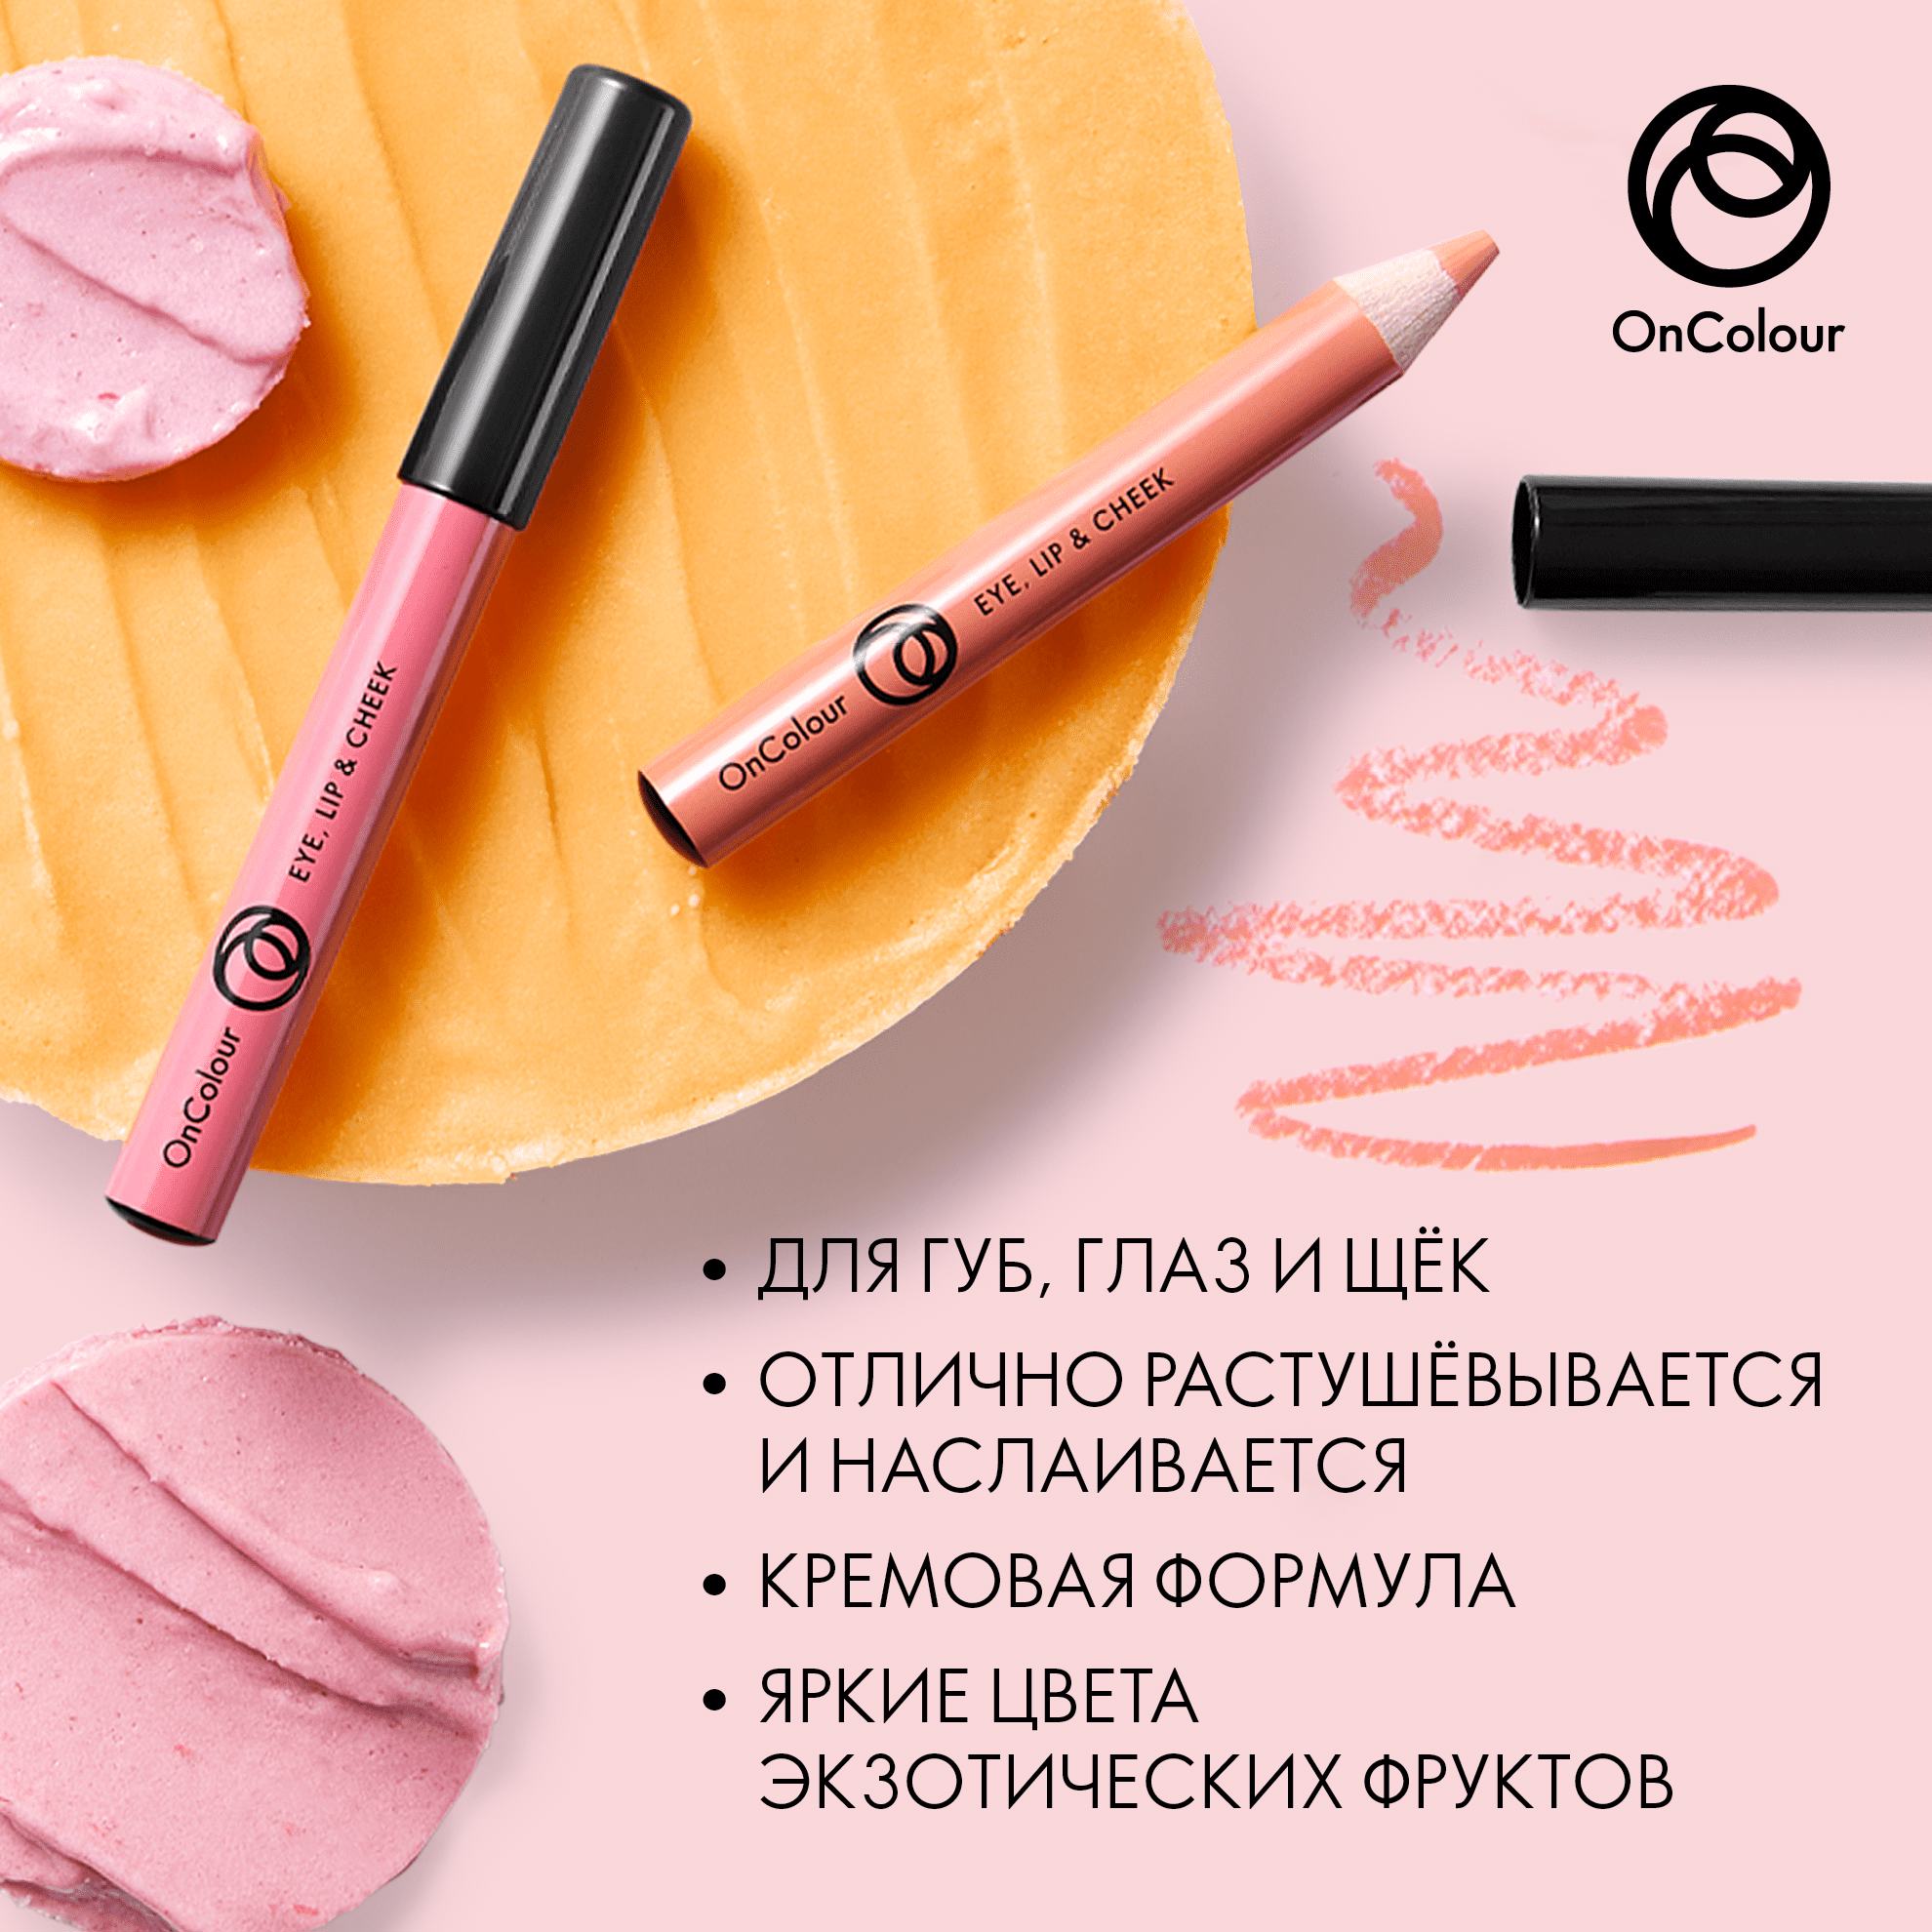 https://media-cdn.oriflame.com/productImage?externalMediaId=product-management-media%2fProducts%2f40967%2fBY%2f40967_5.png&id=2024-03-11T10-05-51-384Z_MediaMigration&version=1655974803